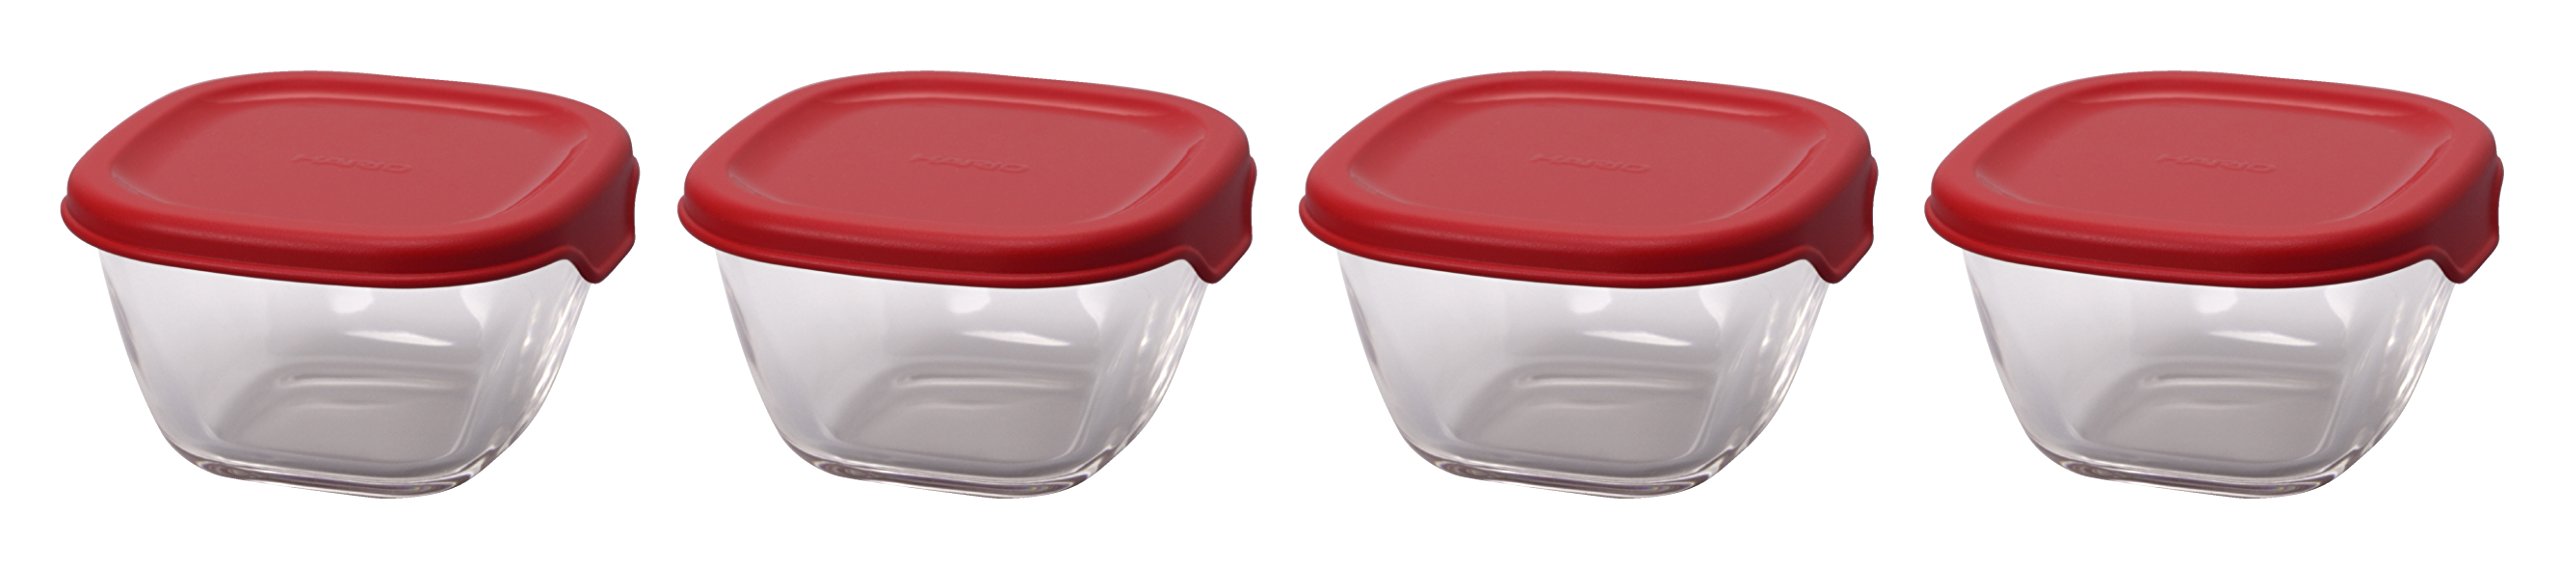 Hario 110ml Heat Resistant Glass Storage Red Container Japan Made Oven/Microwave/Dishwasher Safe 4 Pack